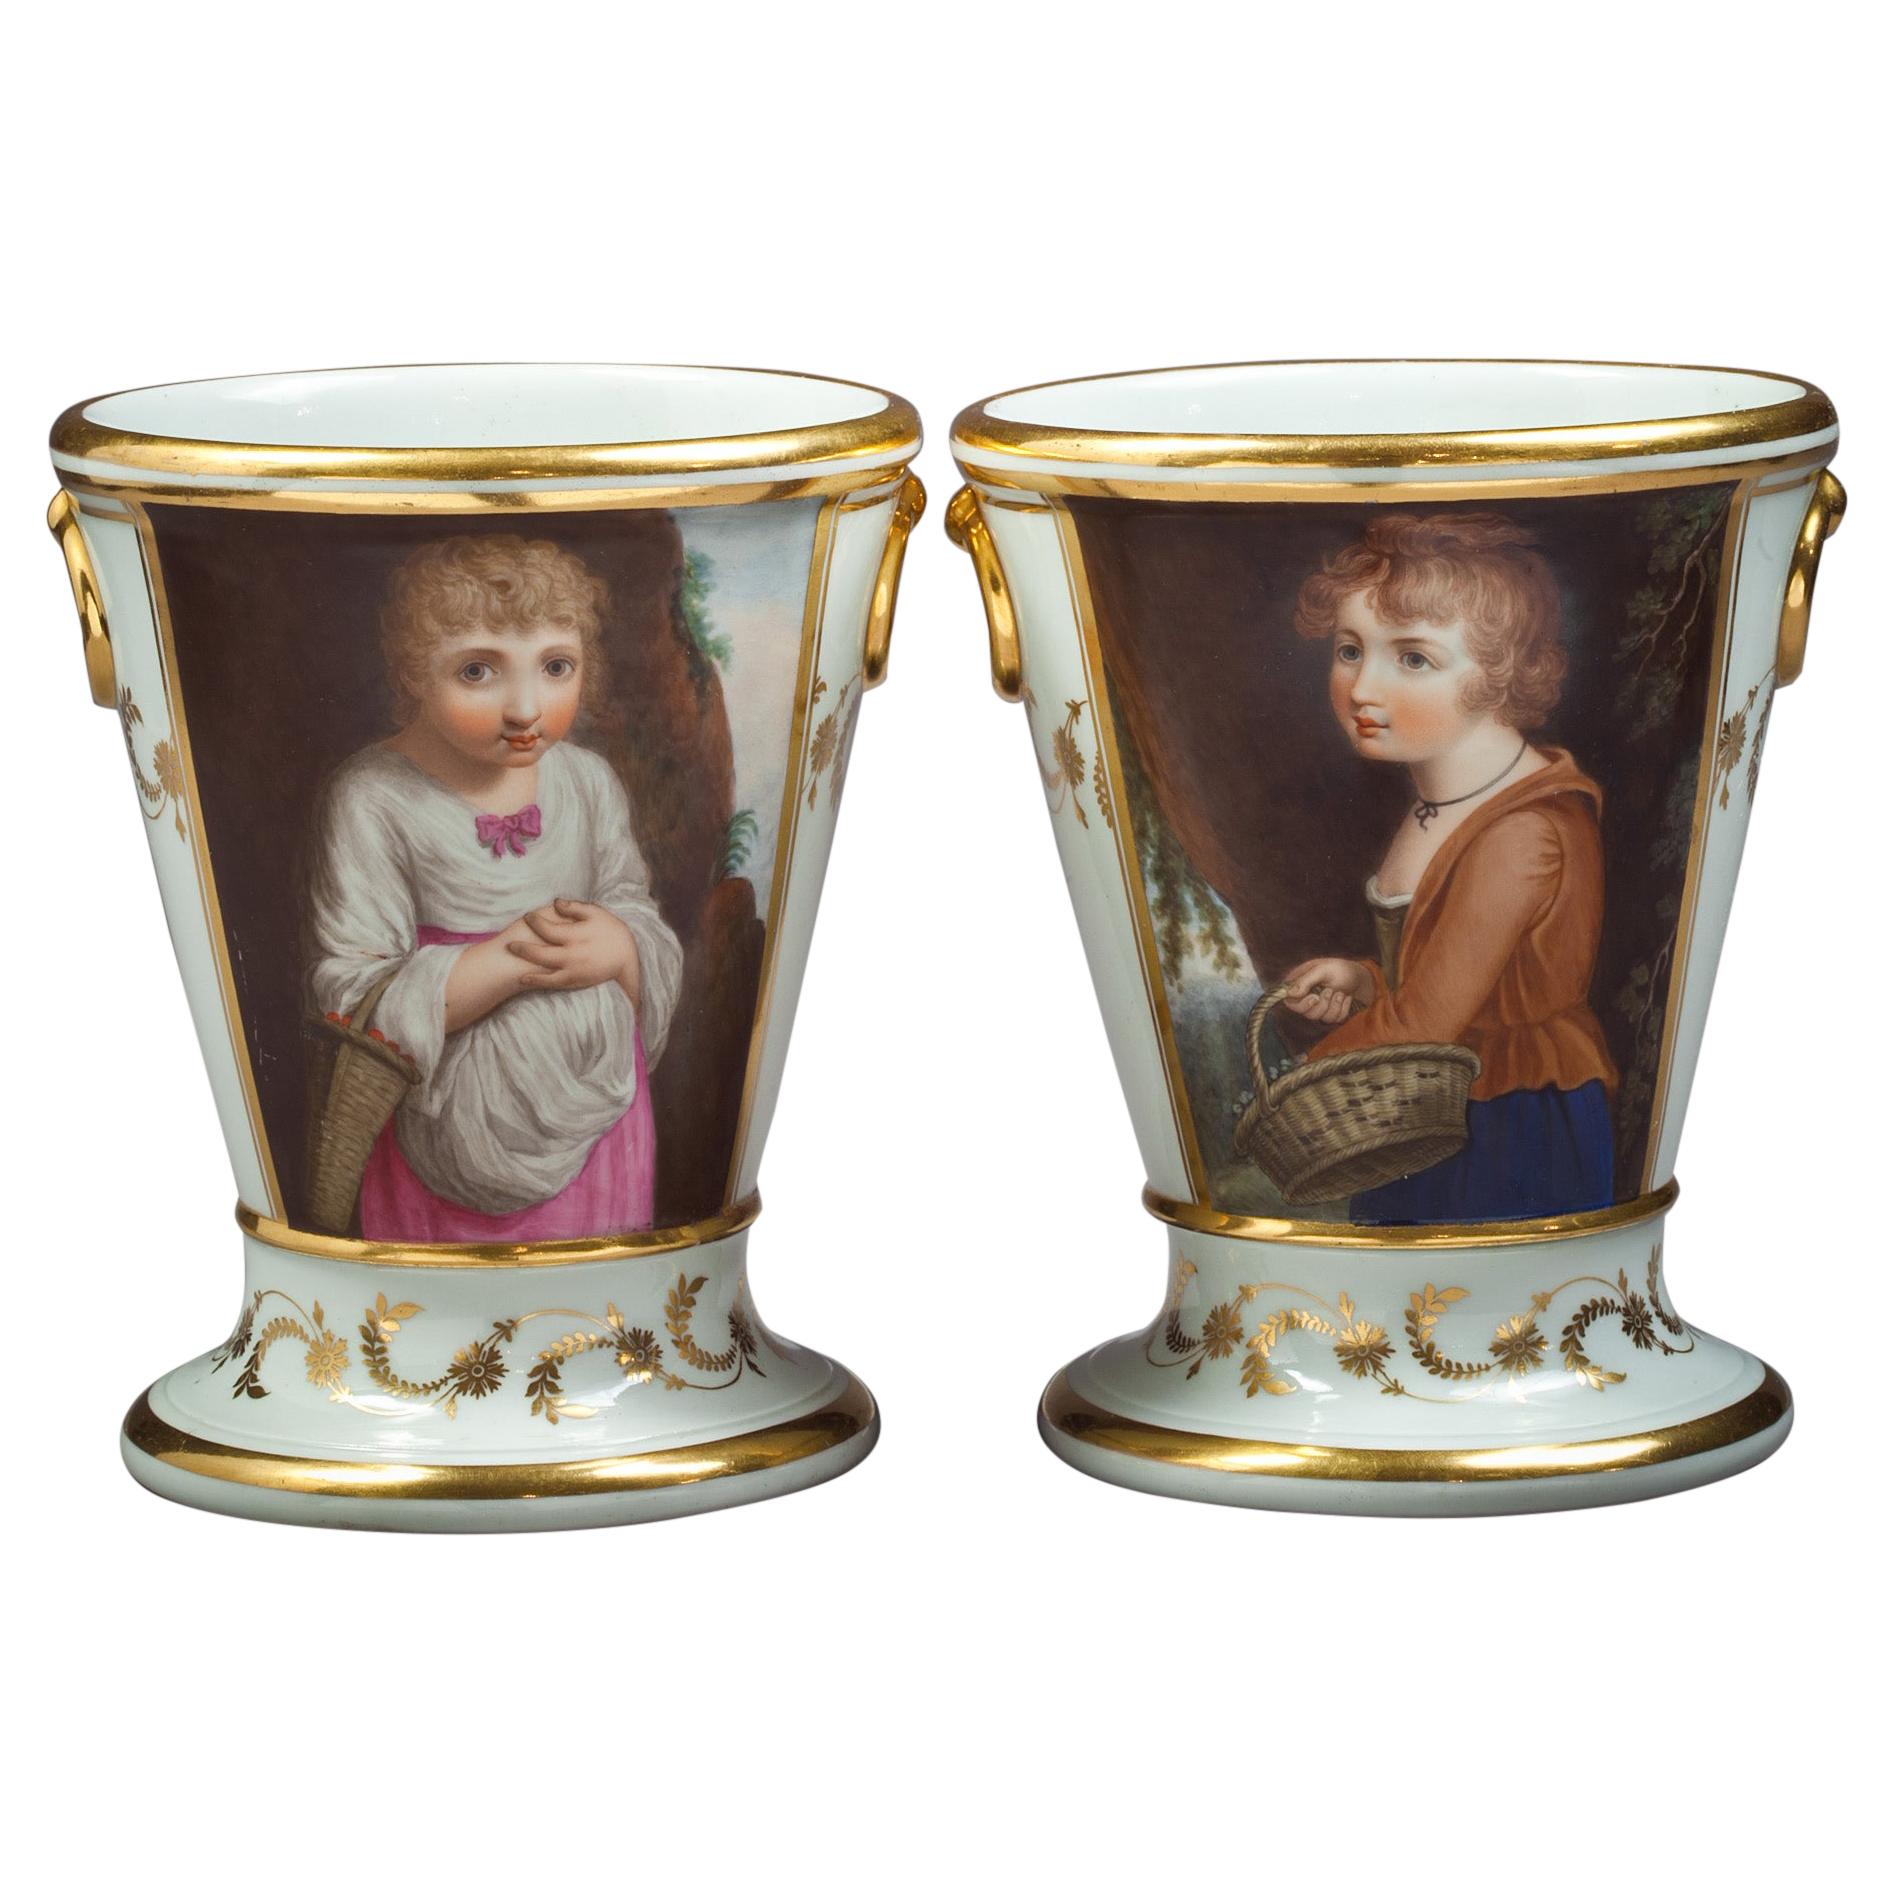 Pair of English Porcelain Cachepots on Stands, Flight Barr and Barr, circa 1800